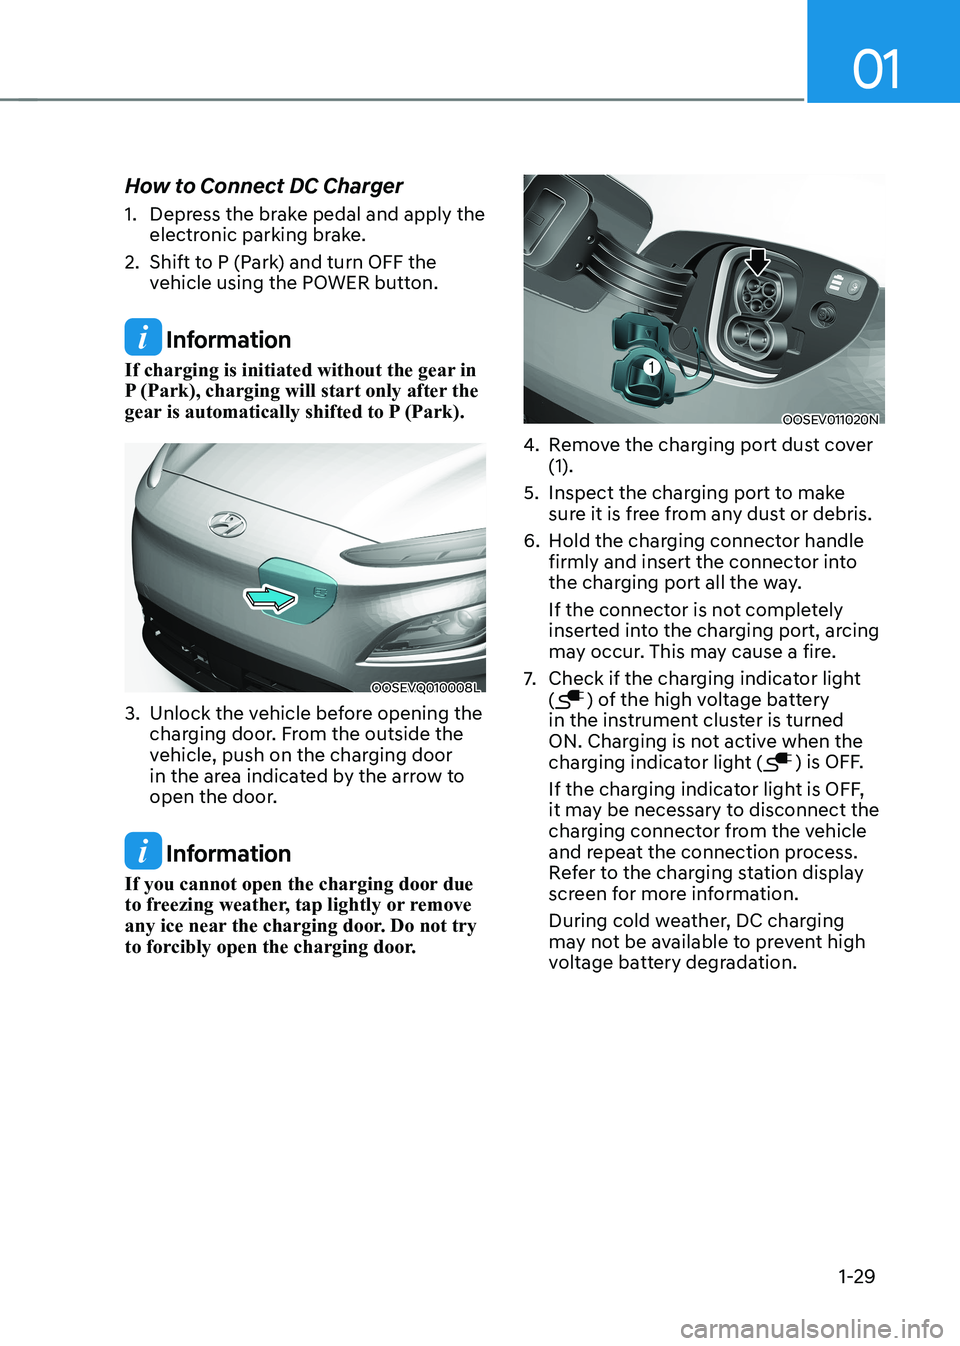 HYUNDAI KONA EV 2023  Owners Manual 01
1-29
How to Connect DC Charger 
1.  Depress the brake pedal and apply the 
electronic parking brake.
2.  Shift to P (Park) and turn OFF the  vehicle using the POWER button.
 Information
If charging